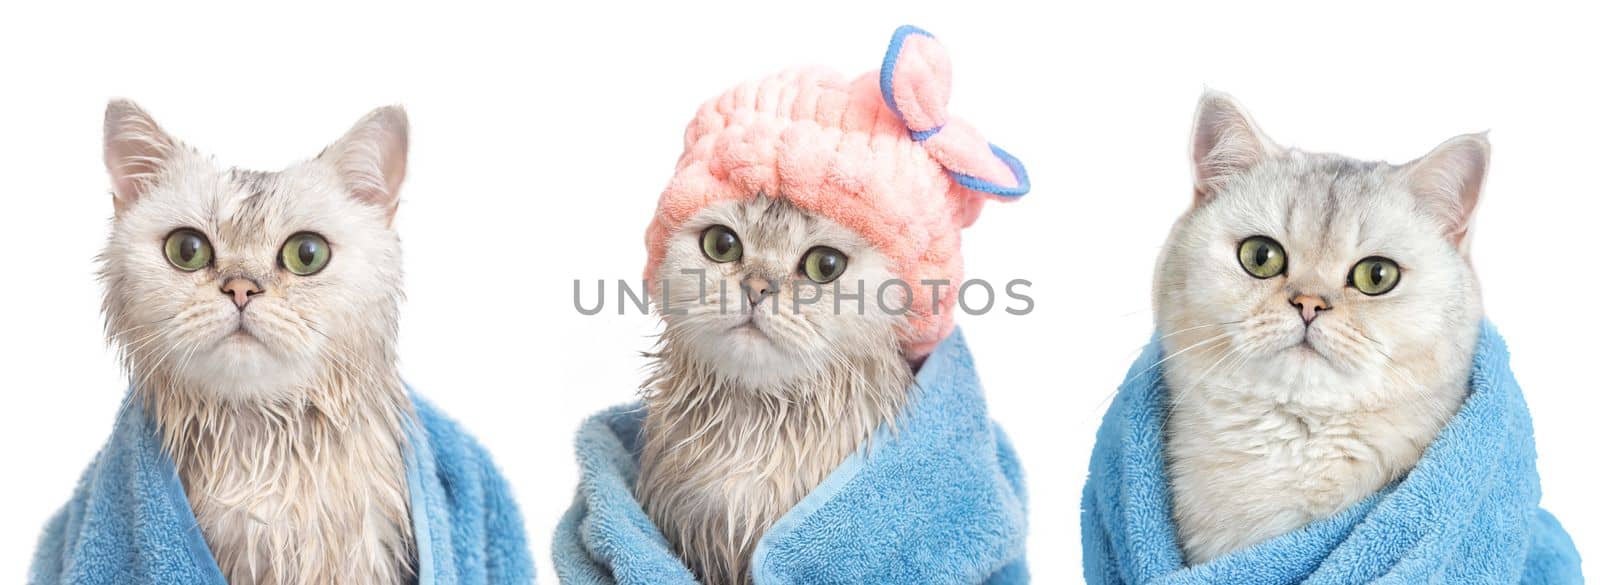 A wide banner of three funny wet white British cats: after bathing, wrapped in a blue towel, in a pink cap on his head and a dry cat in a blue towel, on a white background. Close up